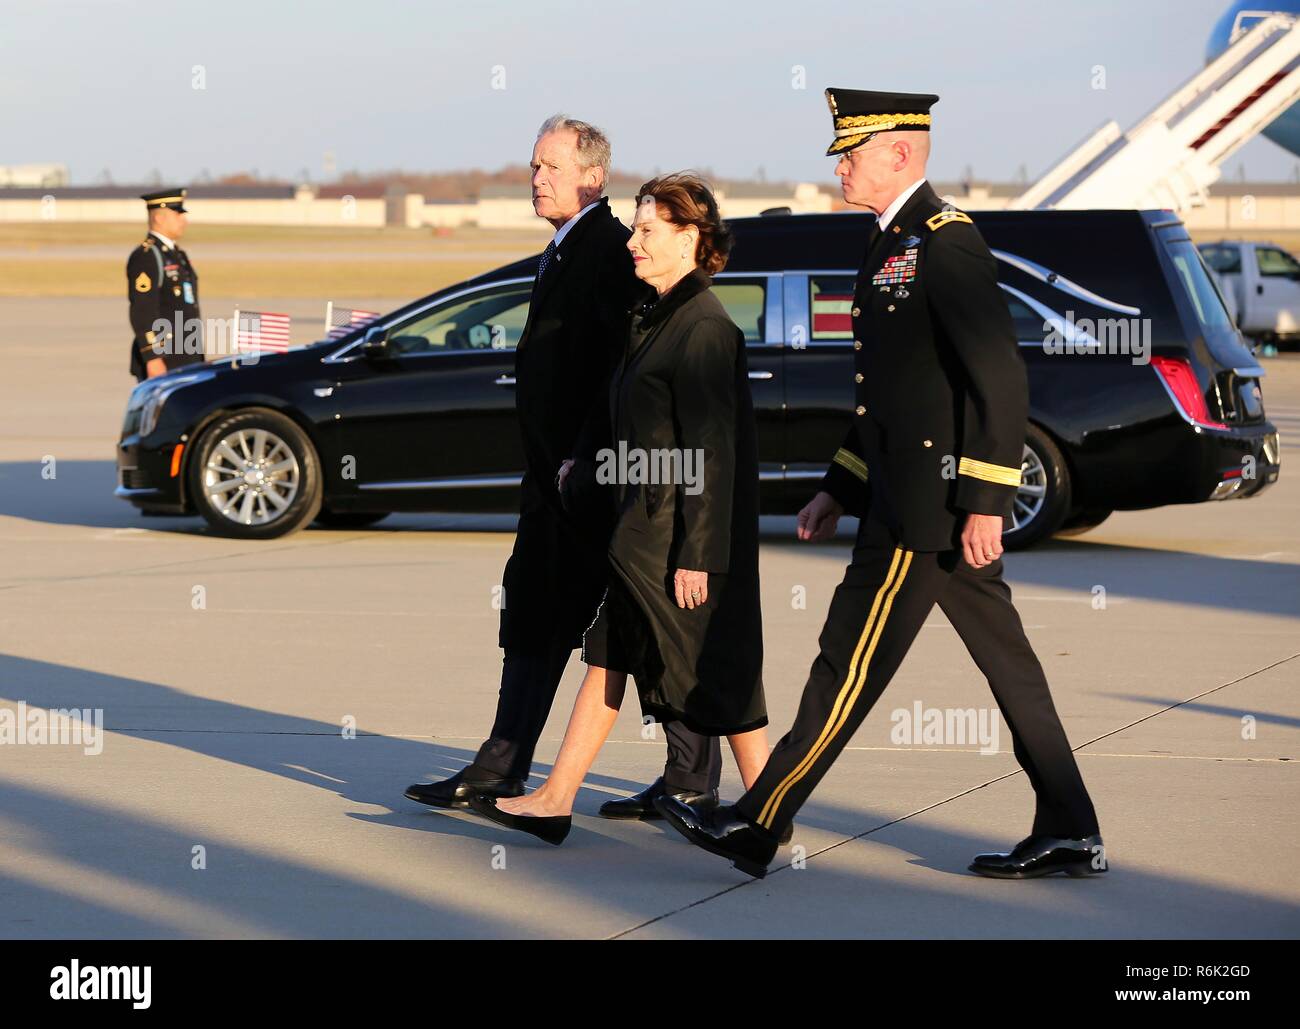 Former President George W. Bush, left, and First Lady Laura Bush, center, arrive from Houston with the the flag-draped casket of his father, former president George H.W. Bush aboard Air Force One December 3, 2018 in Andrews, Maryland. Bush, the 41st President, died in his Houston home at age 94. Stock Photo